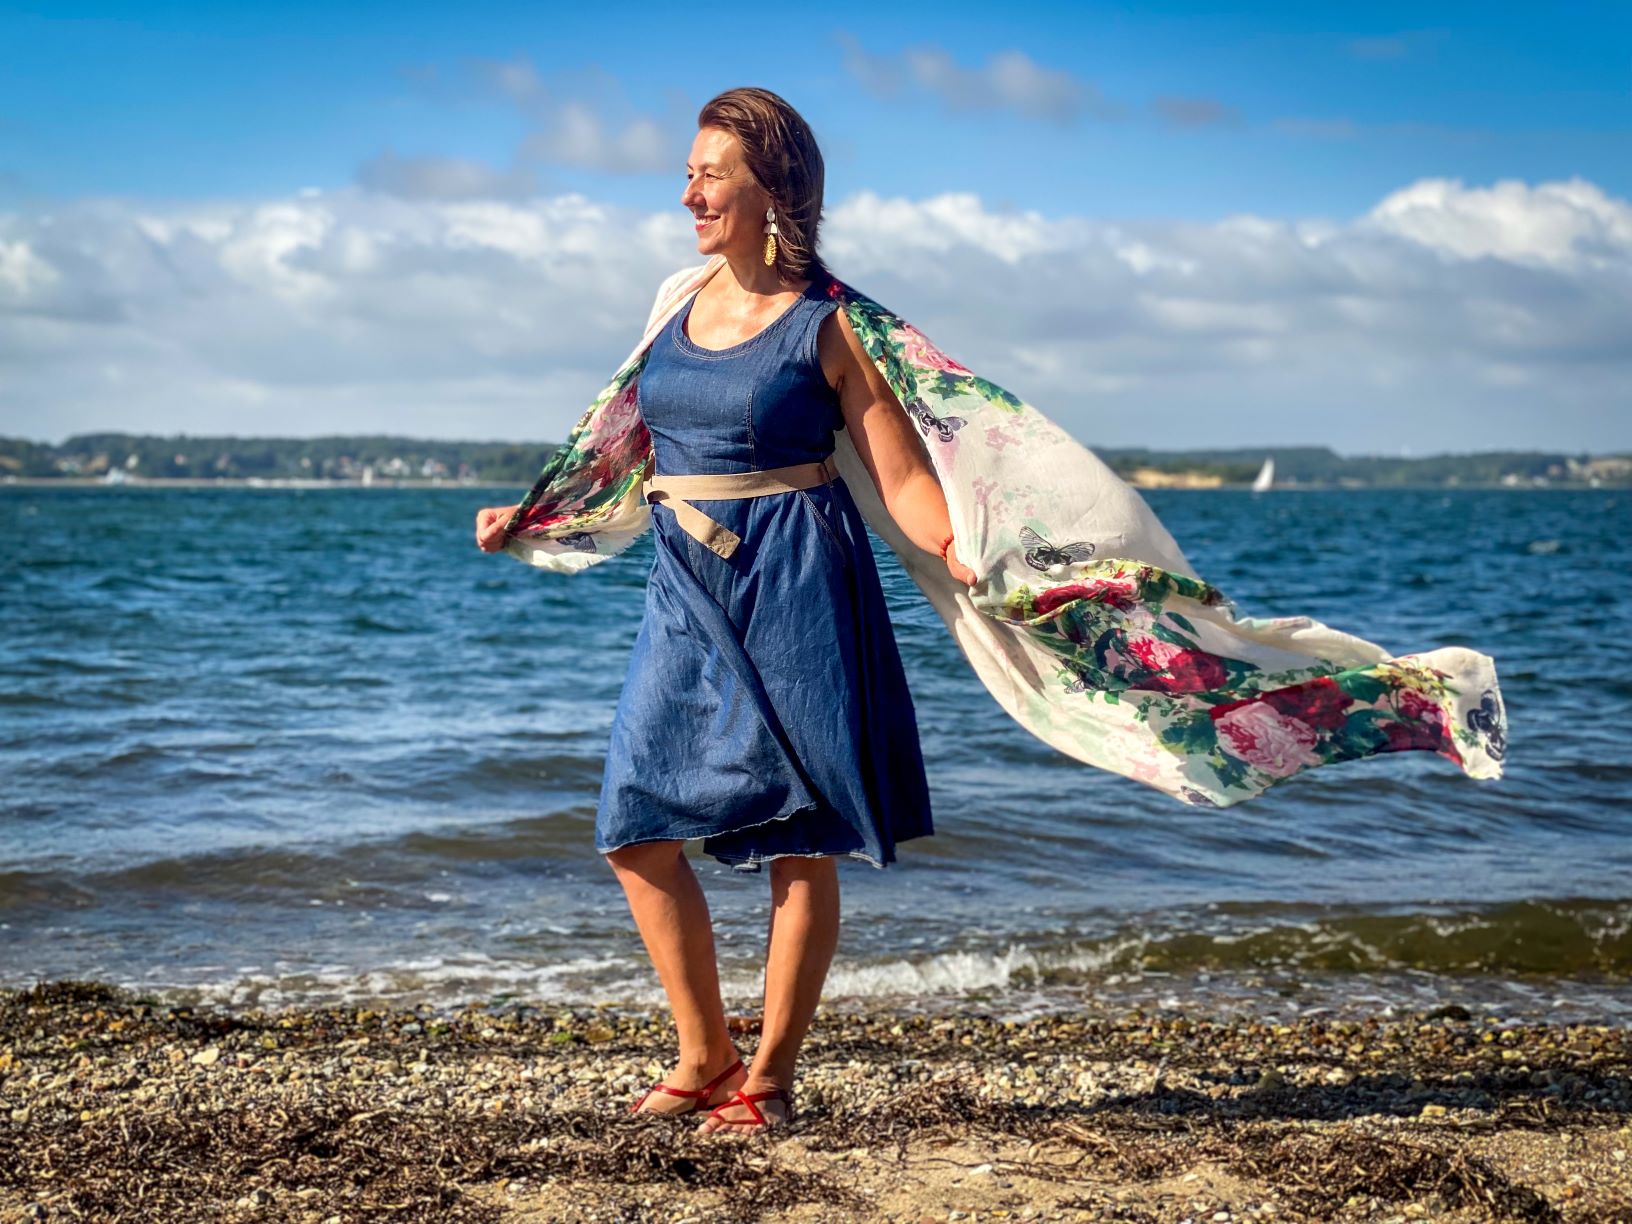 A woman standing on a windy beach with flying scarf